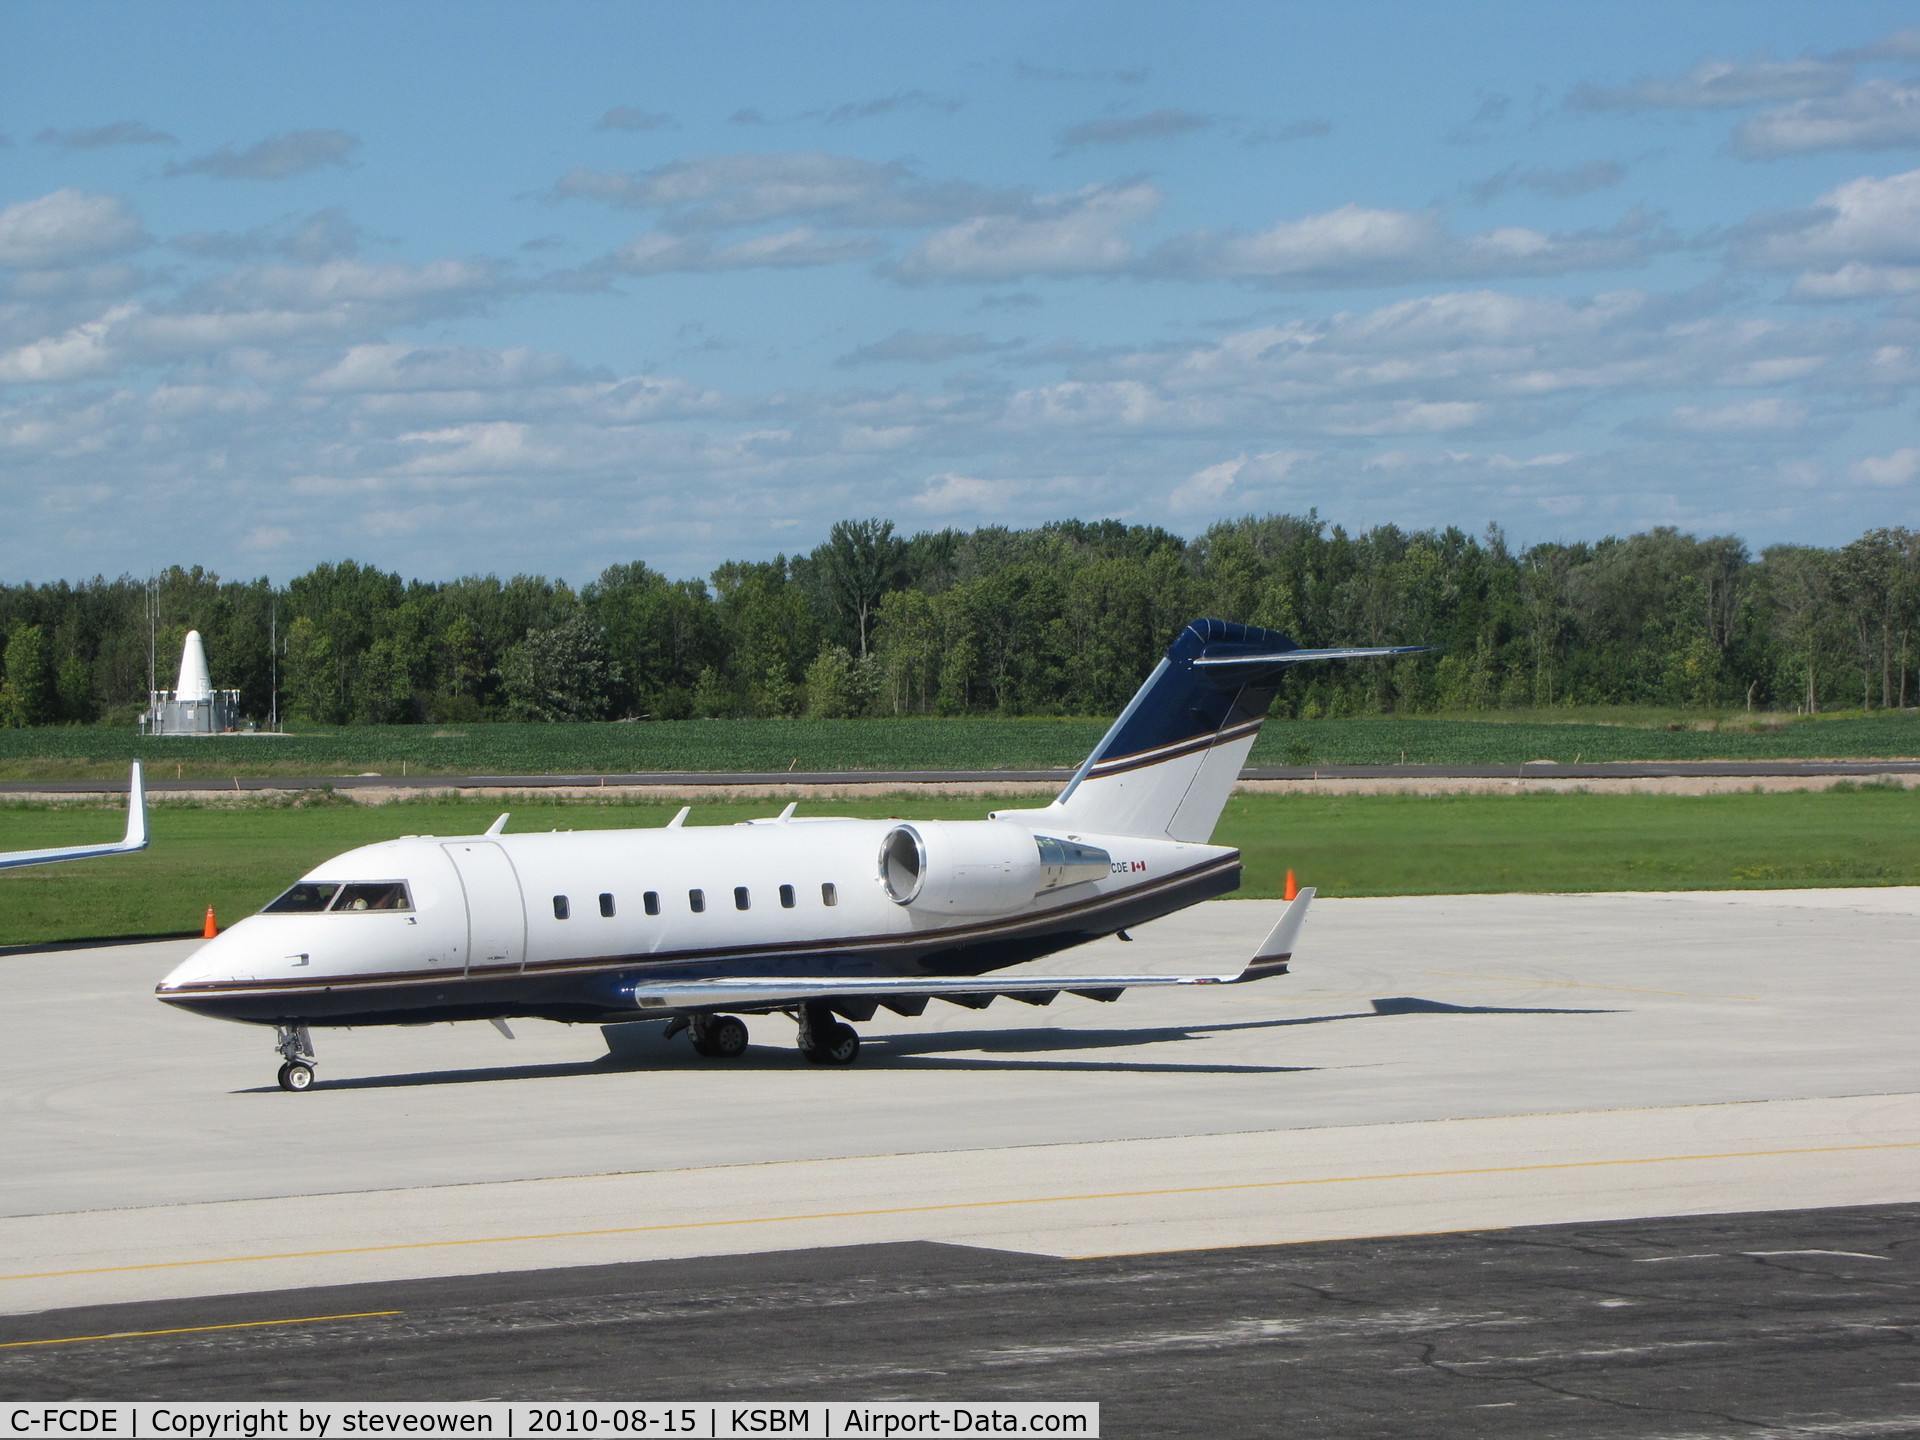 C-FCDE, 1998 Bombardier Challenger 604 (CL-600-2B16) C/N 5392, Canadian Challenger taxing out @ KSBM during the PGA Tour